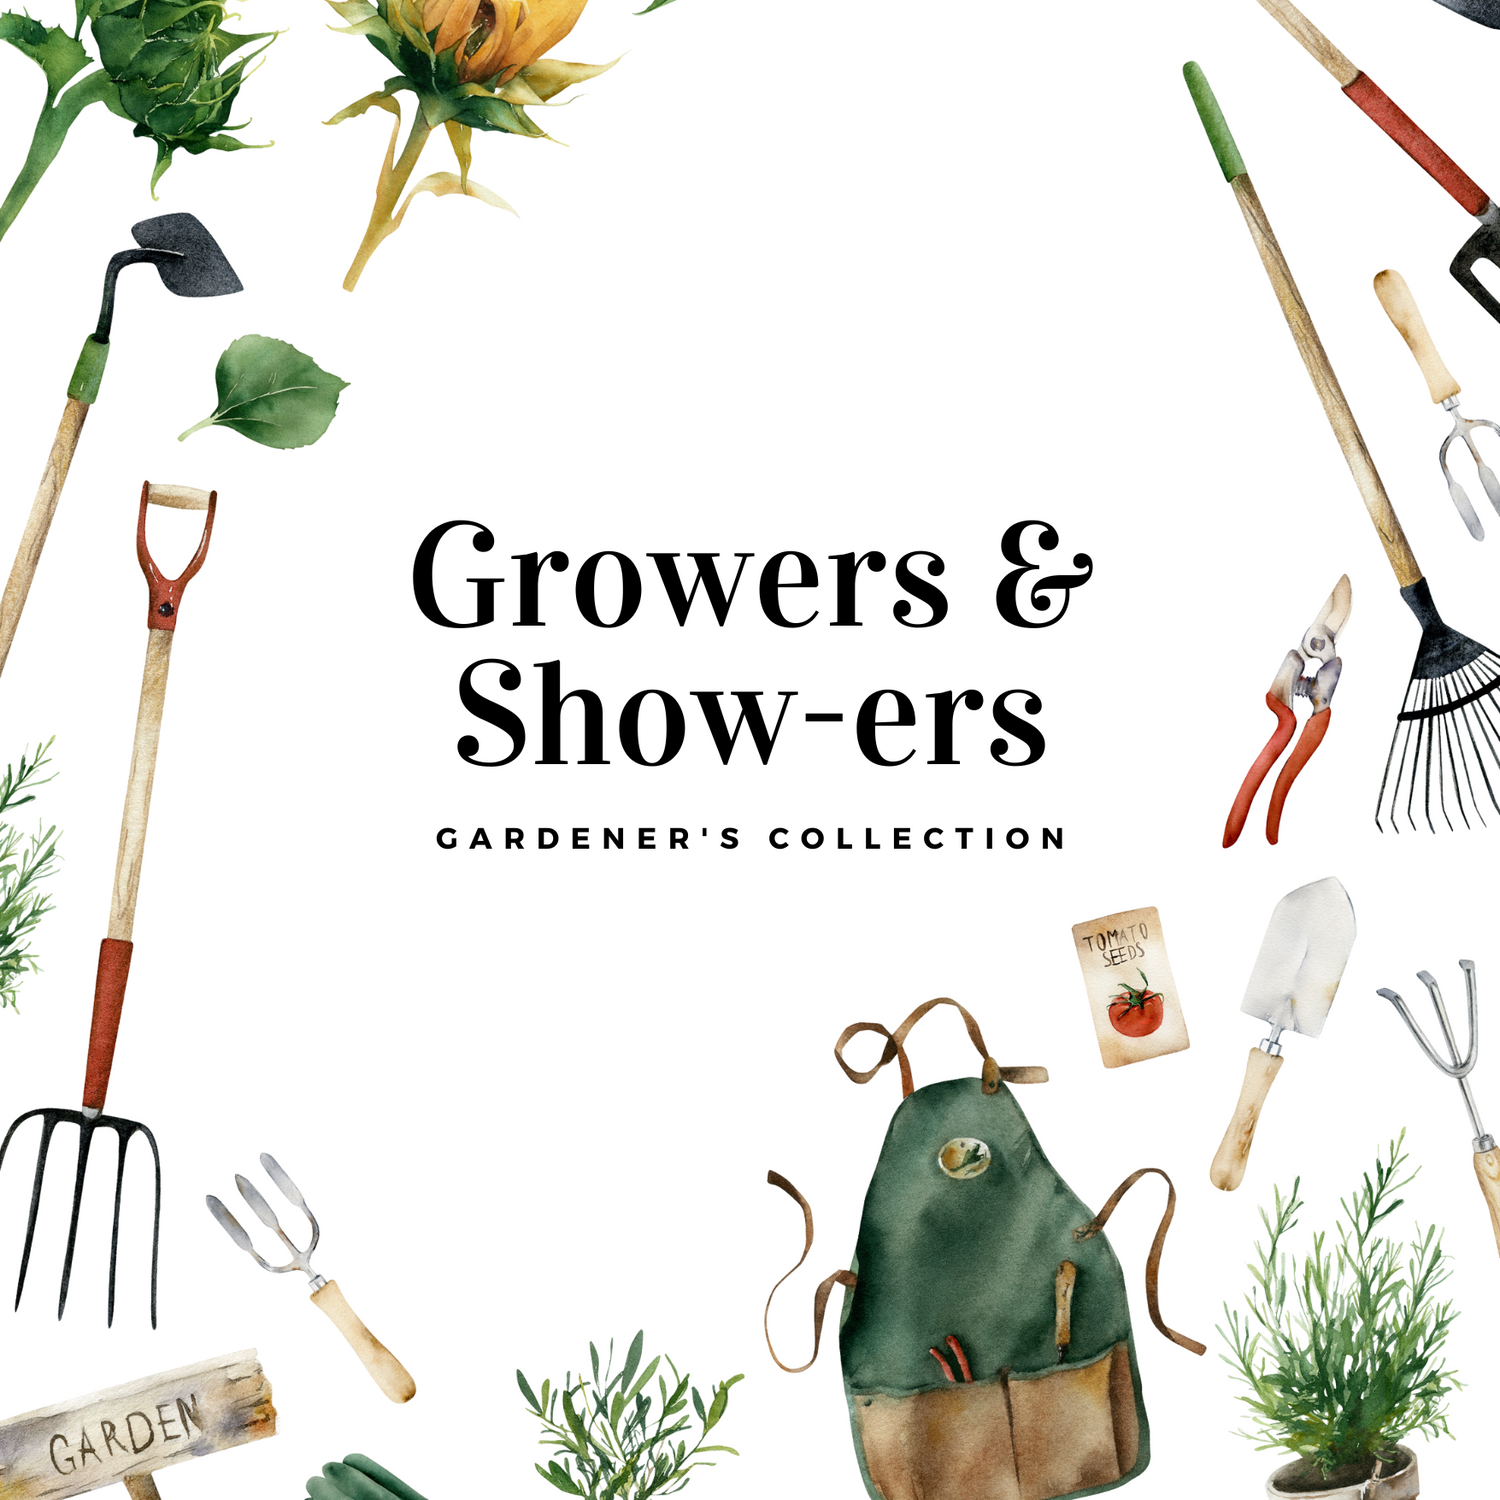 Growers & Show-ers Gardener's Collection